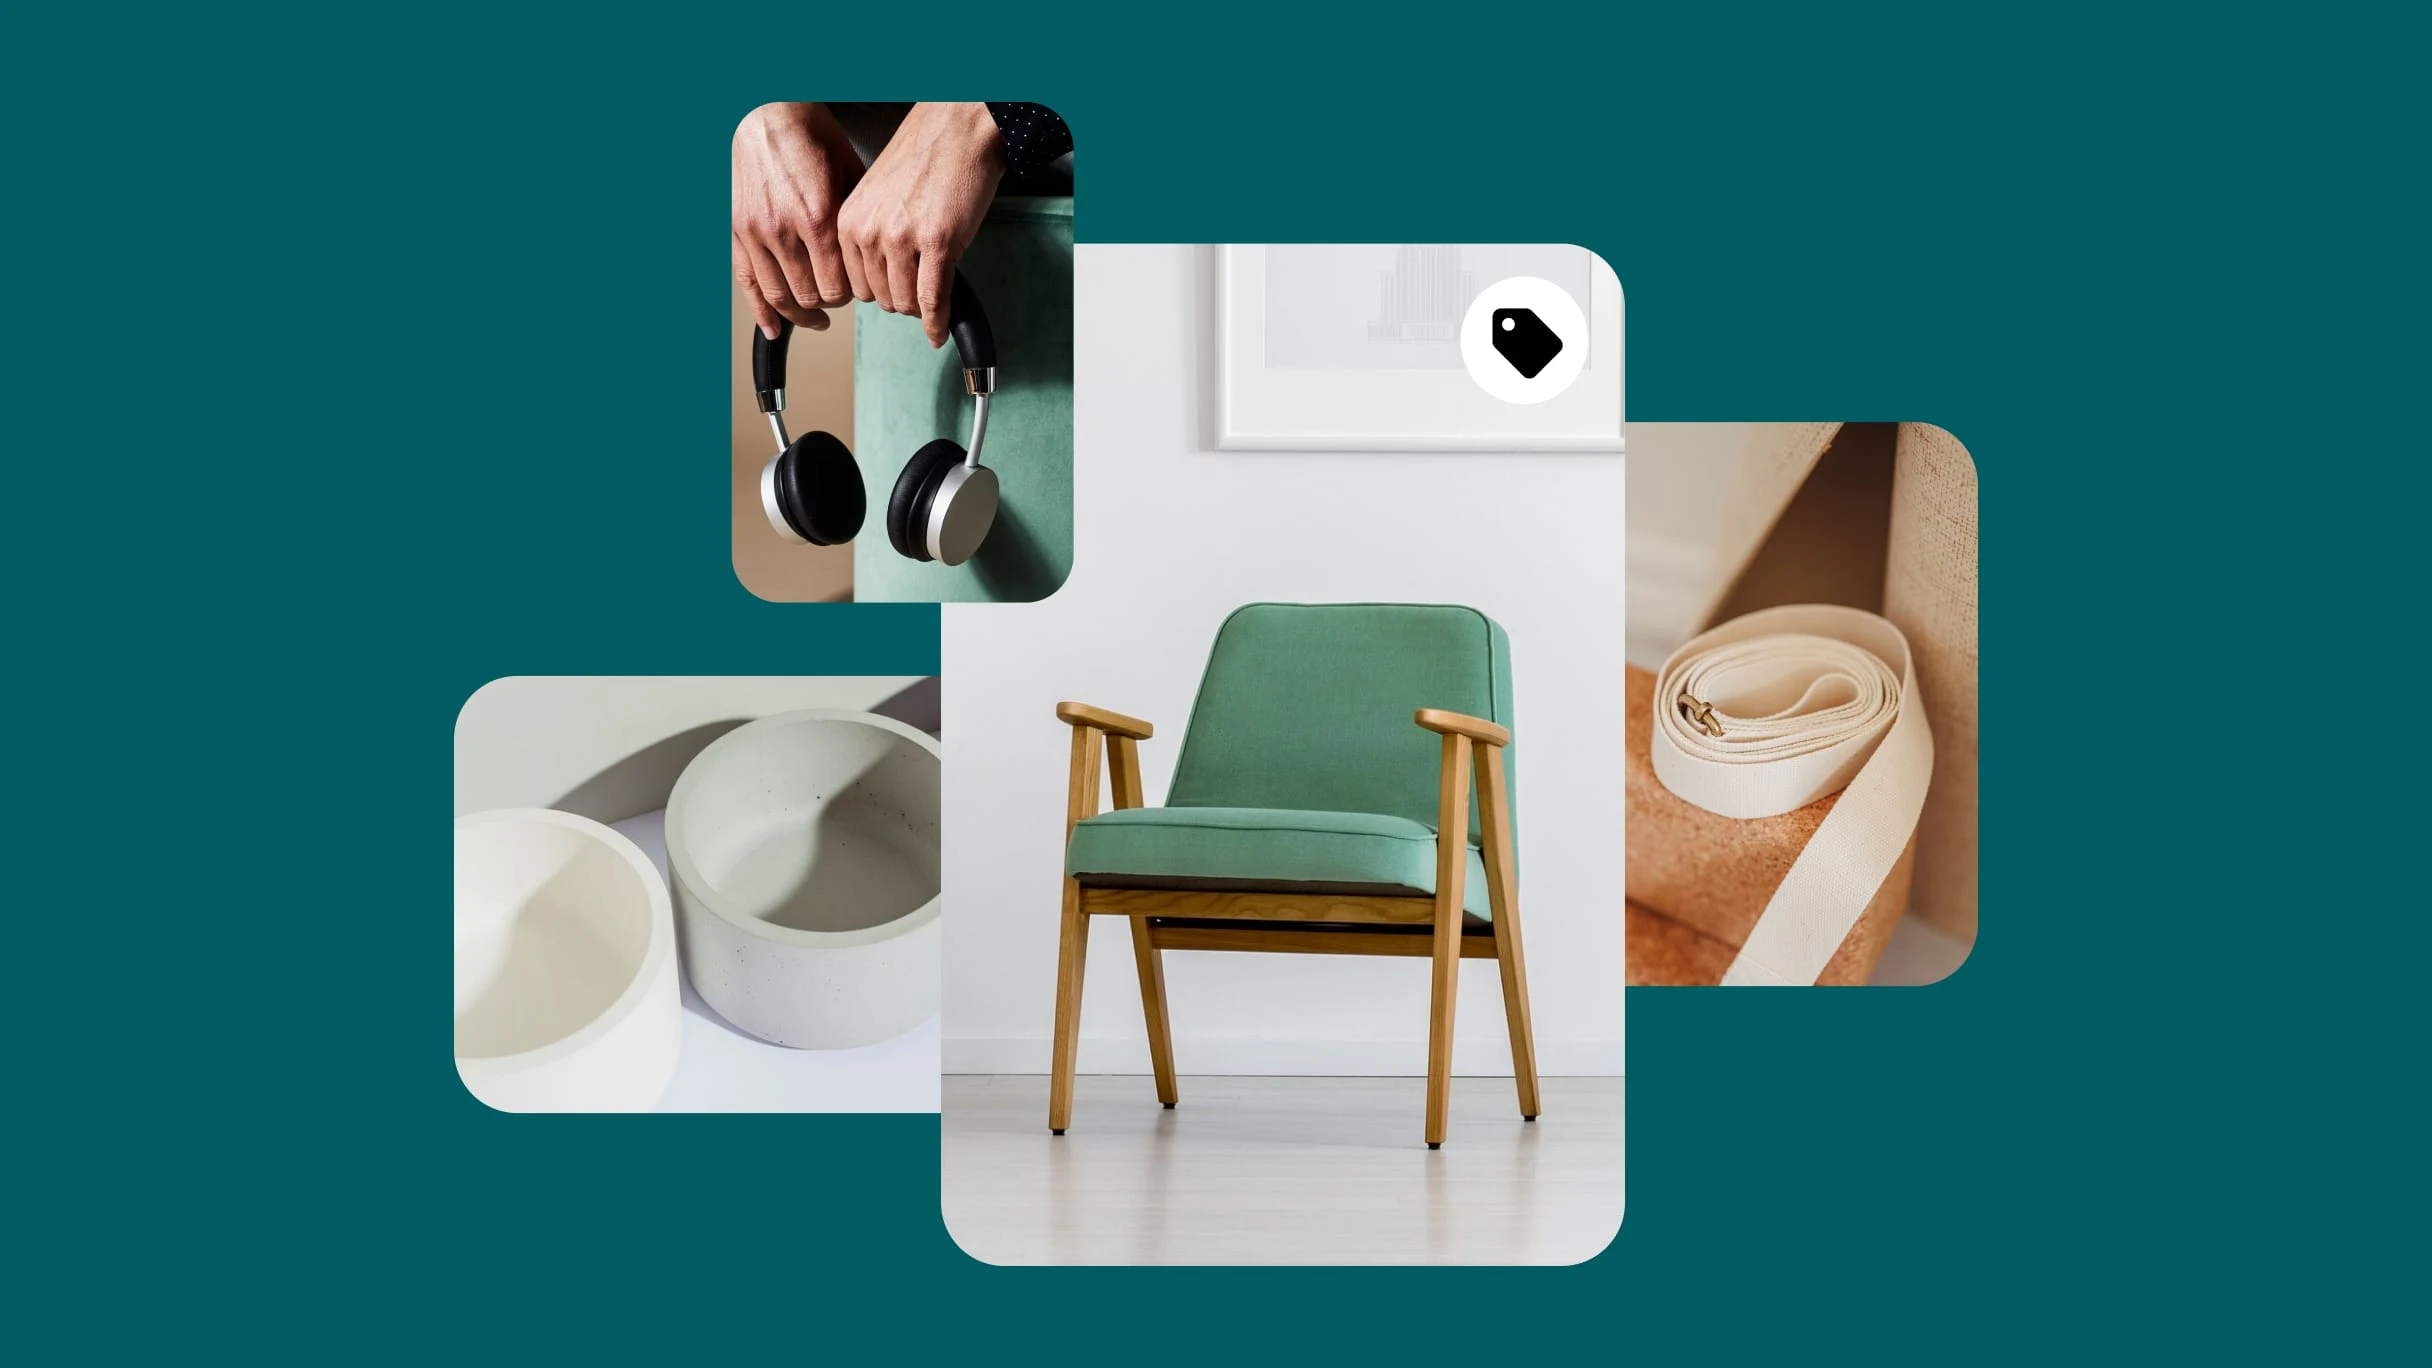  On a green background, there are four images. To the left,  one white and one gray bowl. Above it,  two hands are clutching silver headphones and a picture of a mint green chair.  An image of a tan tape measure, sitting on top of a cork-colored ledge. 